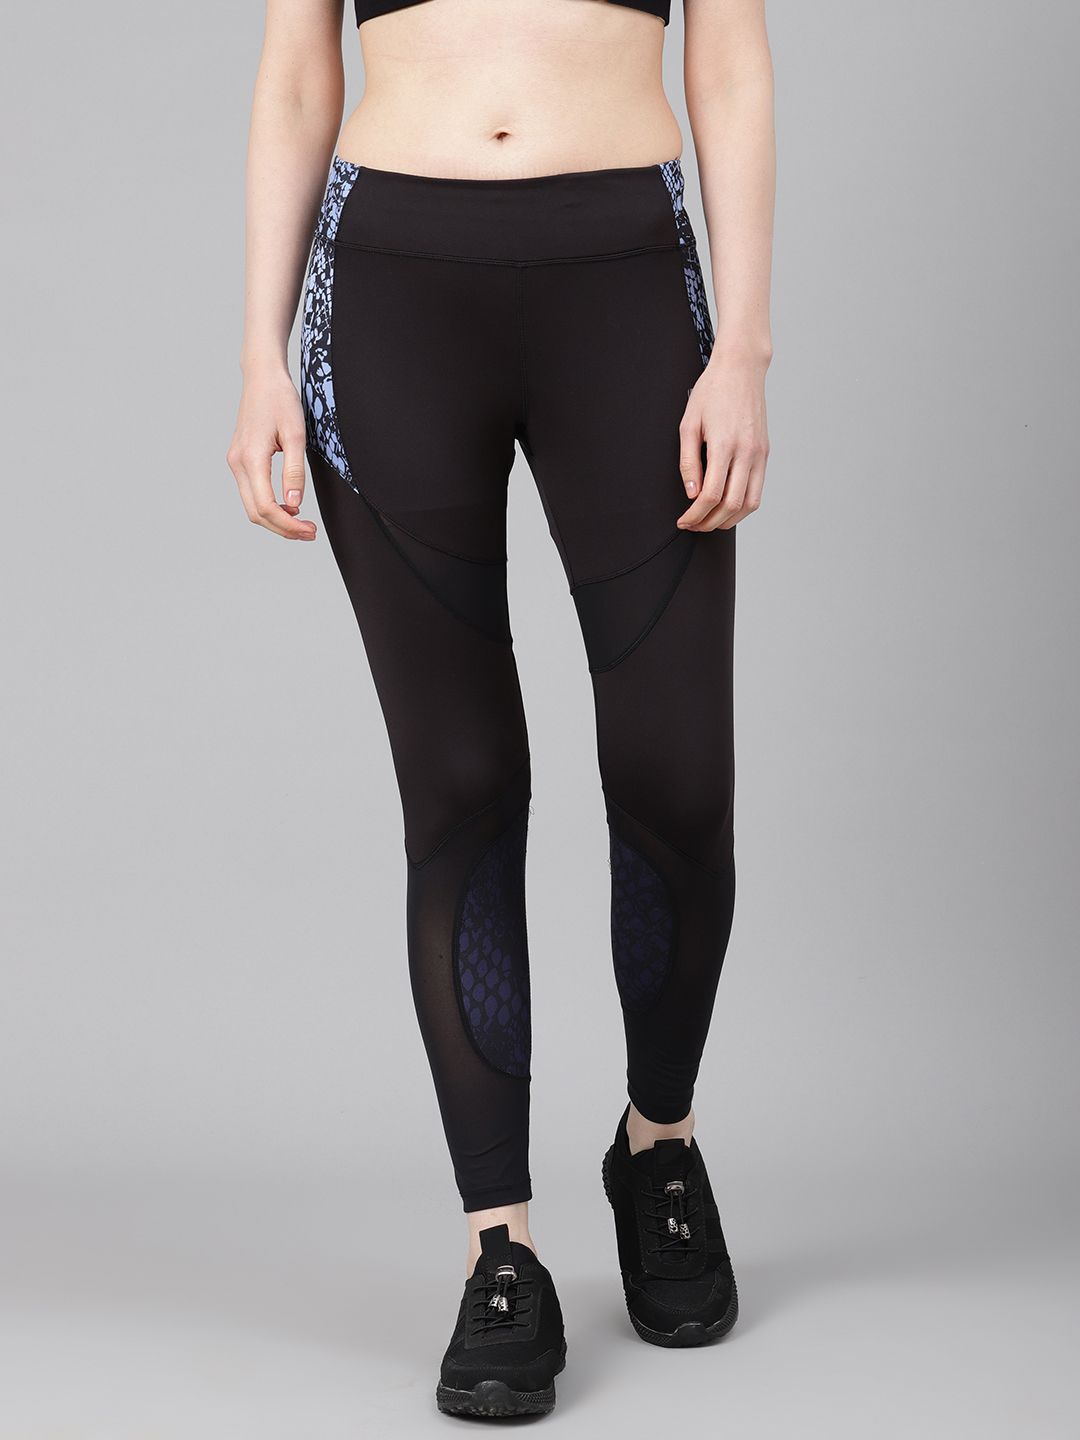 Alcis Women Black Printed Detail Training Tights Price in India